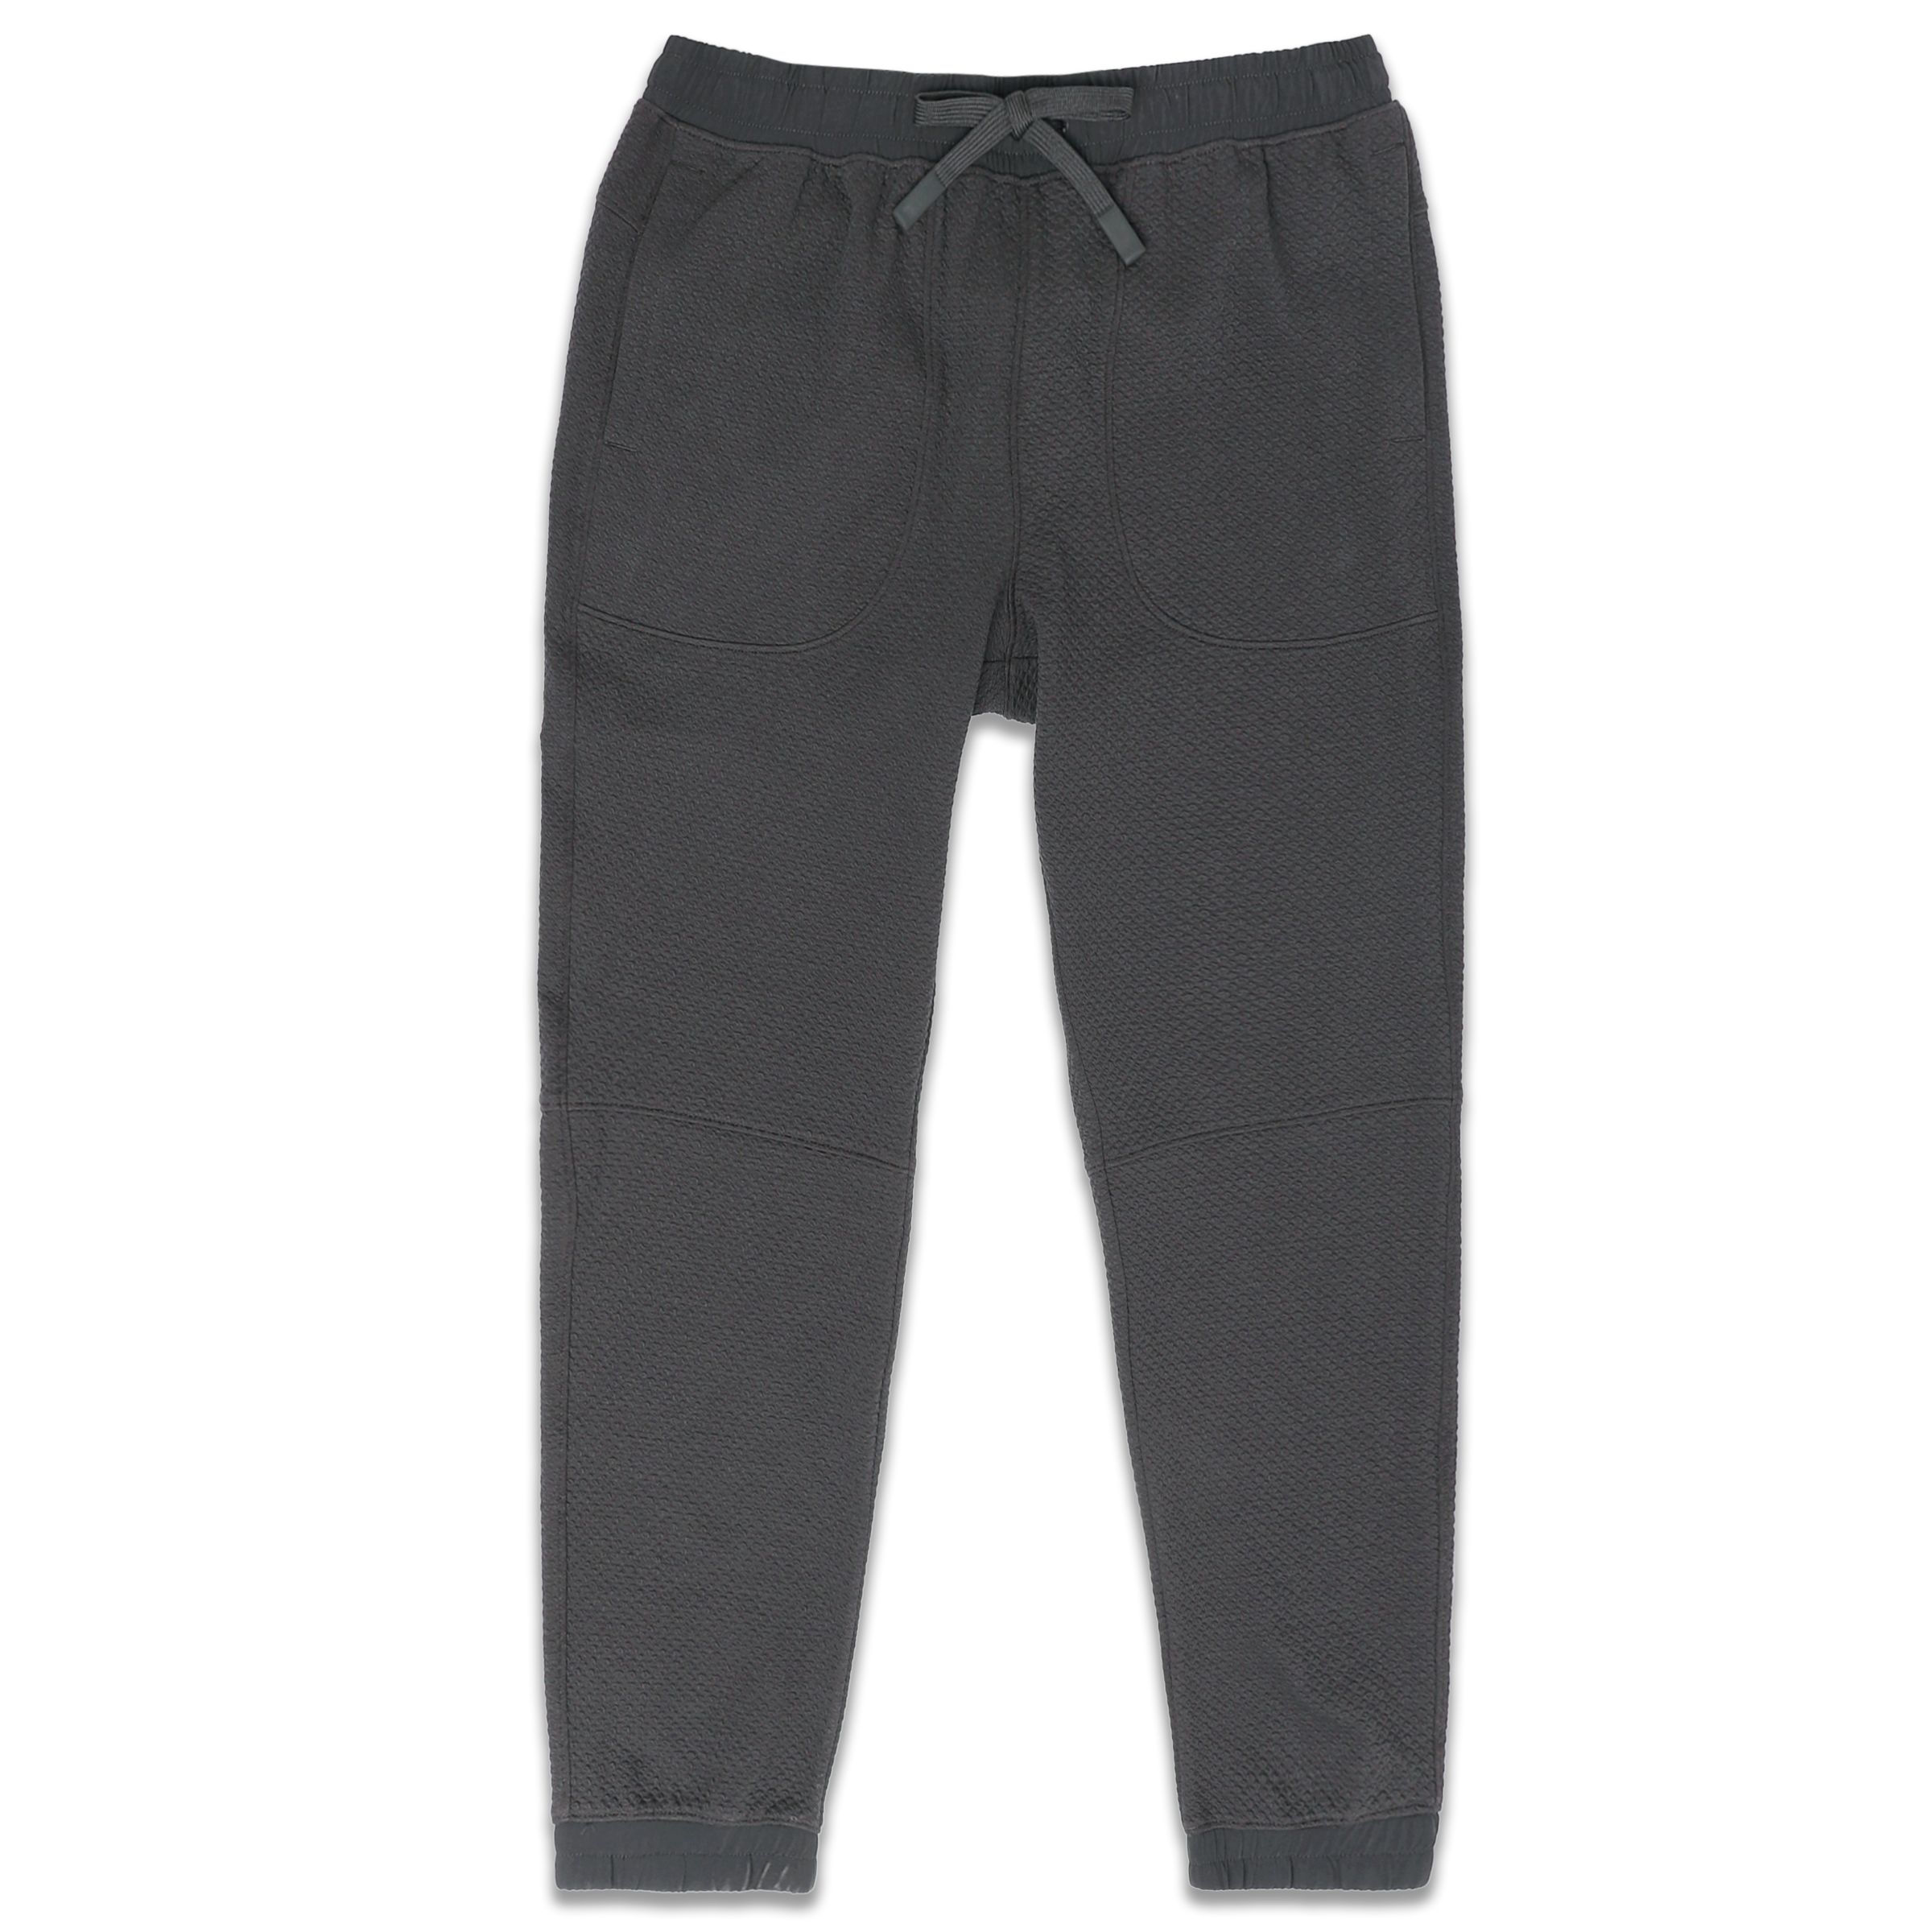 Roam Jogger Coal front with an elastic wstband, two side seam pockets, dyed to match drawstring, and ribbed ankle cuffs